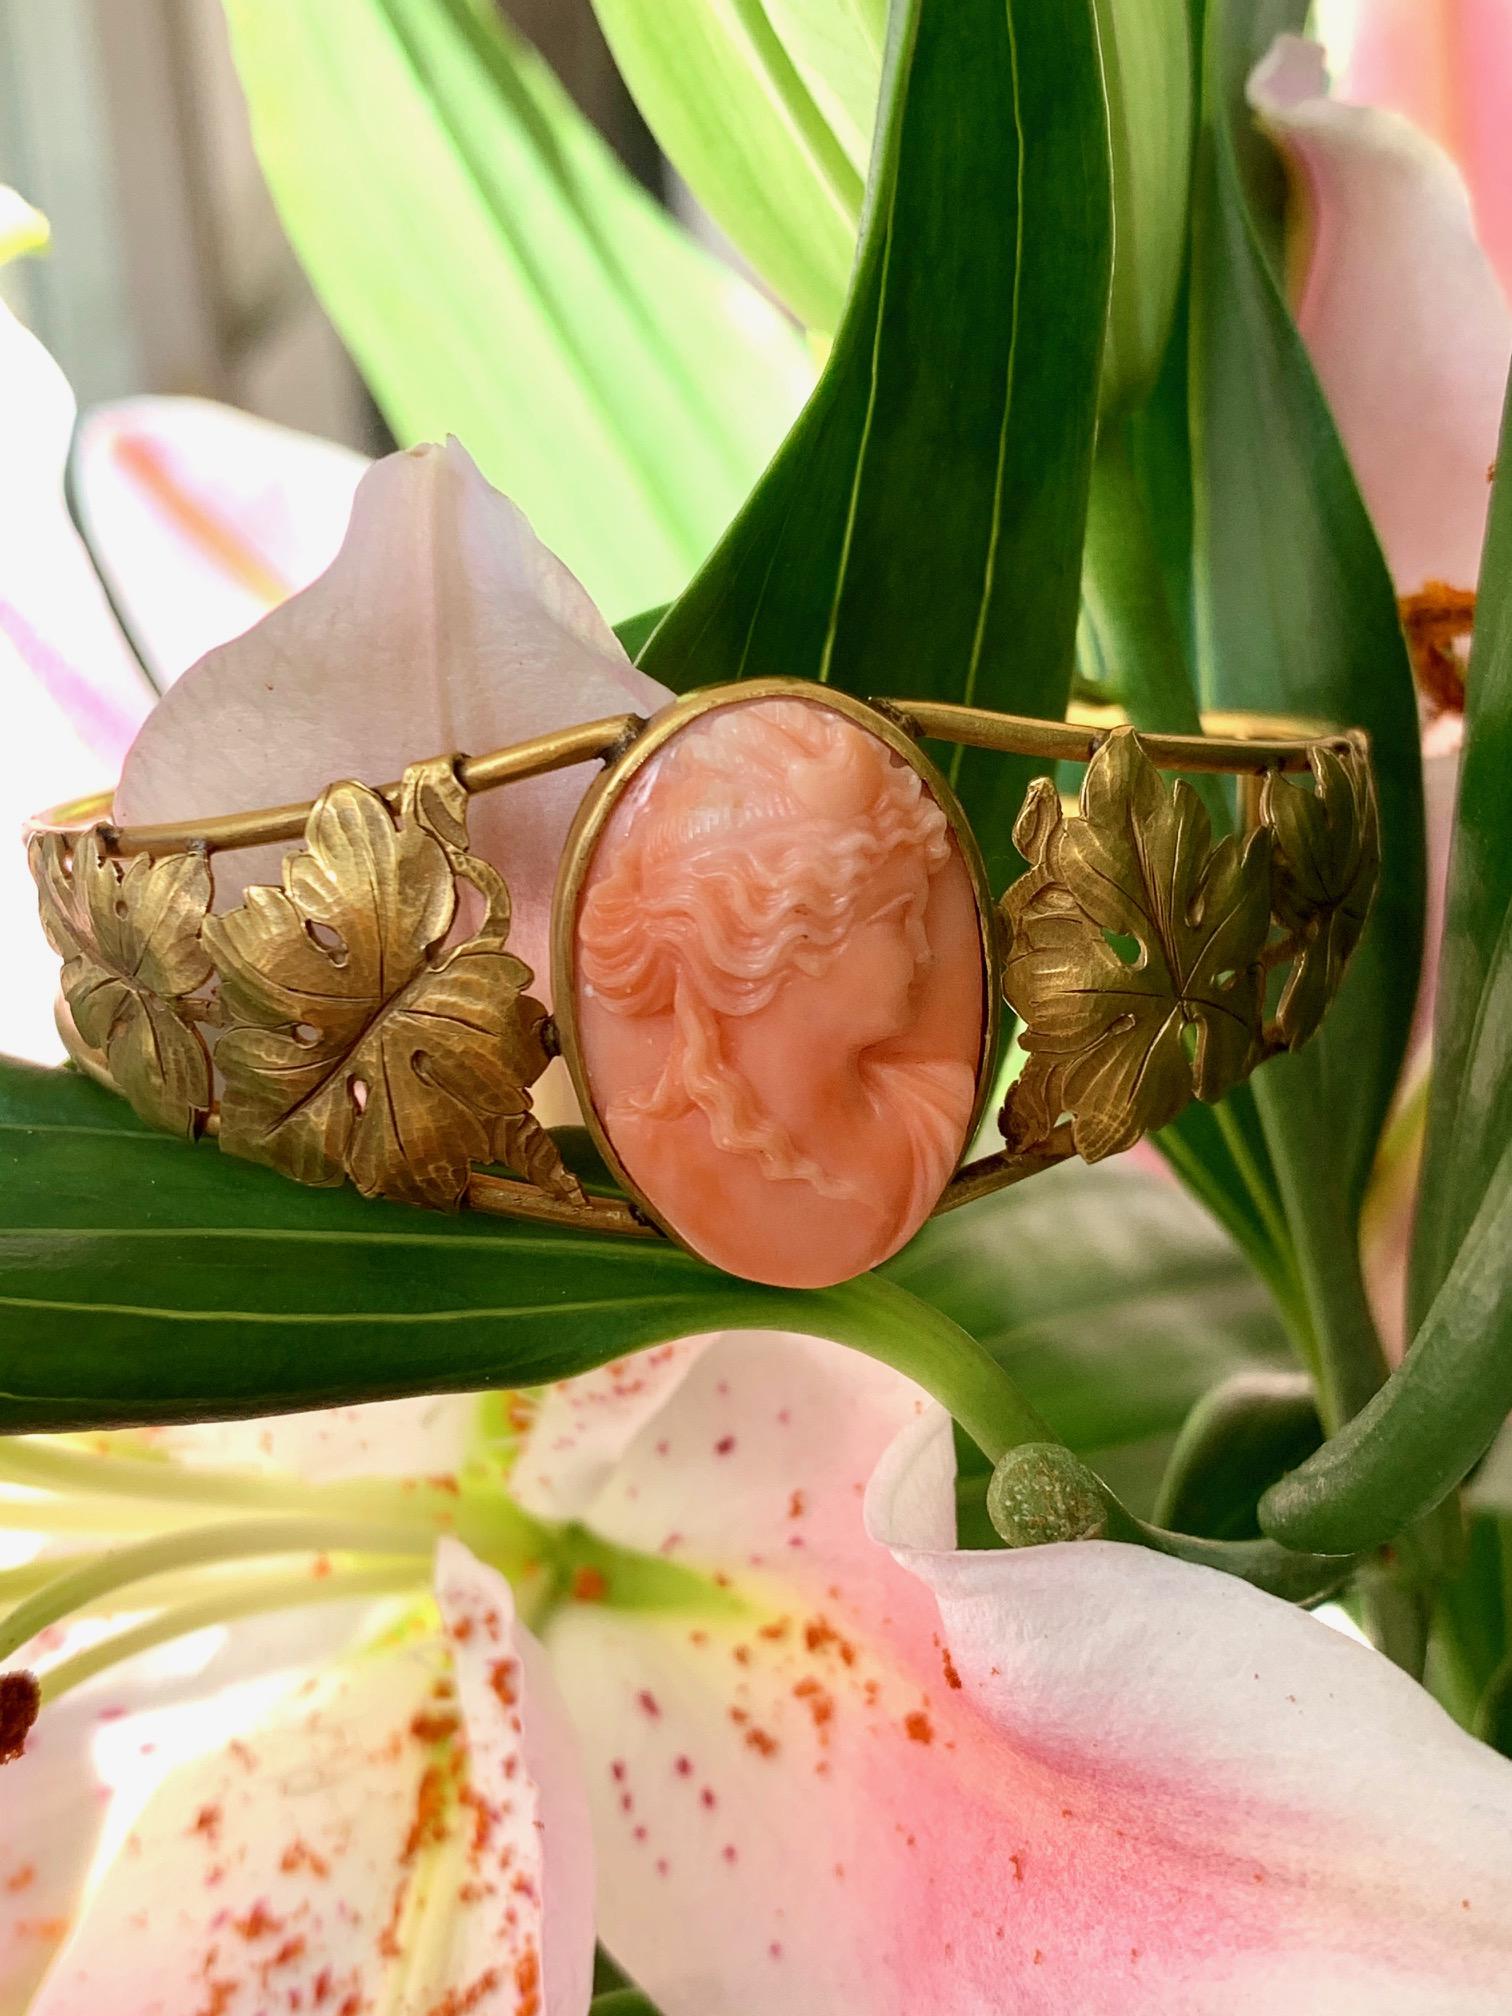 This beautiful Art Nouveau 14k gold bangle with carved Mediterranean salmon coral cameo center on stylized leaf forms, is a stunner!  

The outside circumference measures 8 1/4